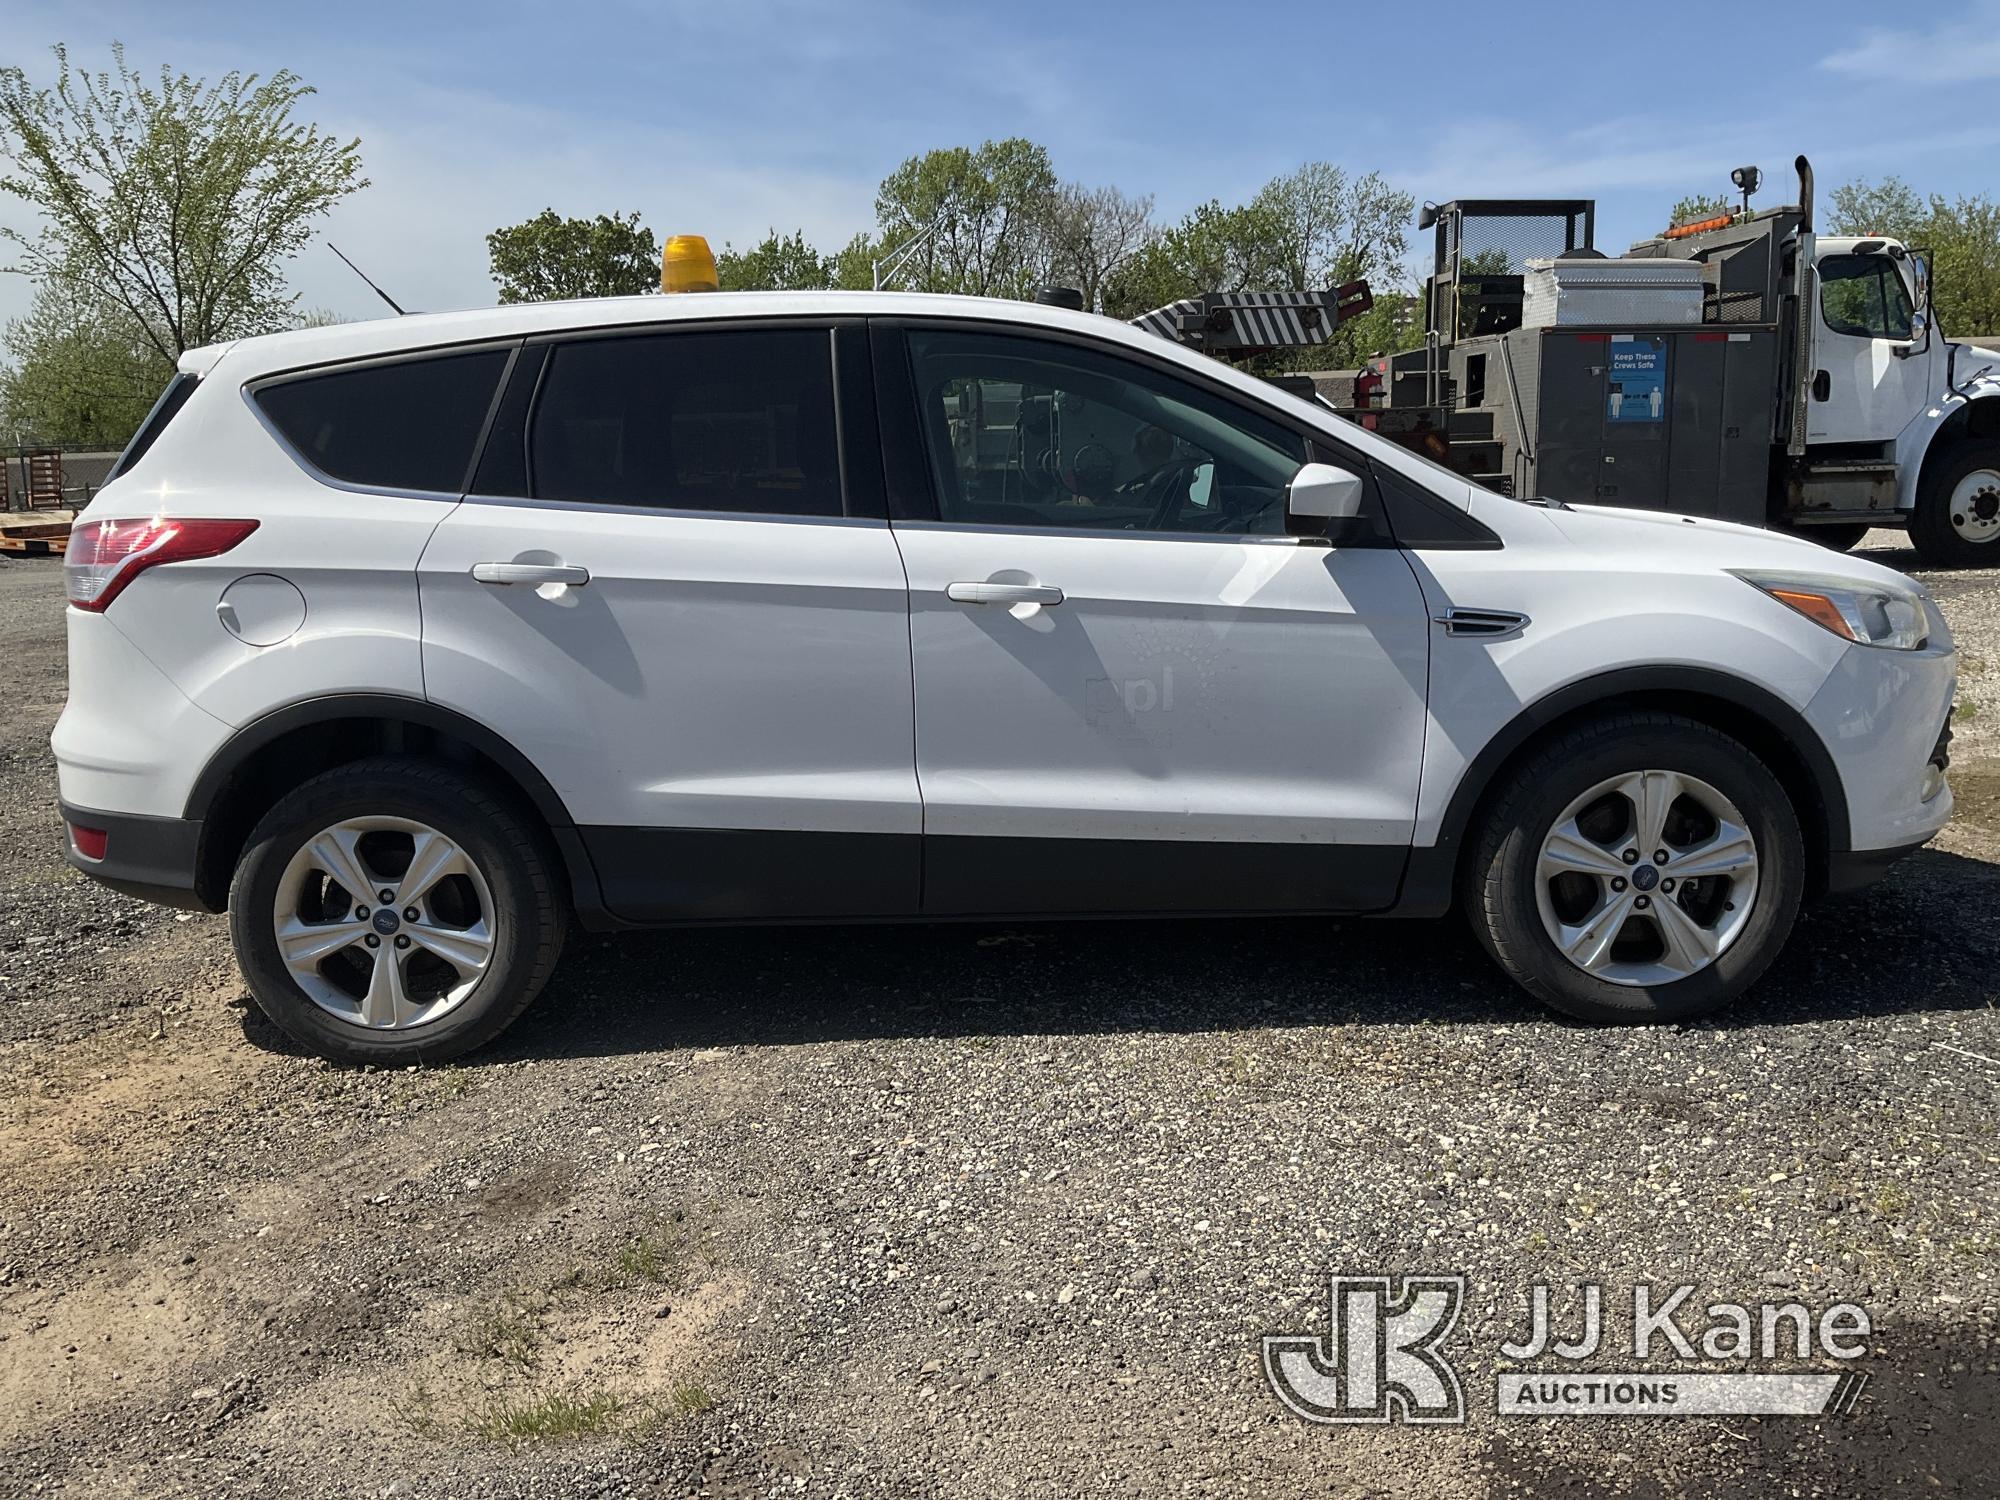 (Plymouth Meeting, PA) 2013 Ford Escape 4x4 4-Door Sport Utility Vehicle Runs & Moves, Body & Rust D